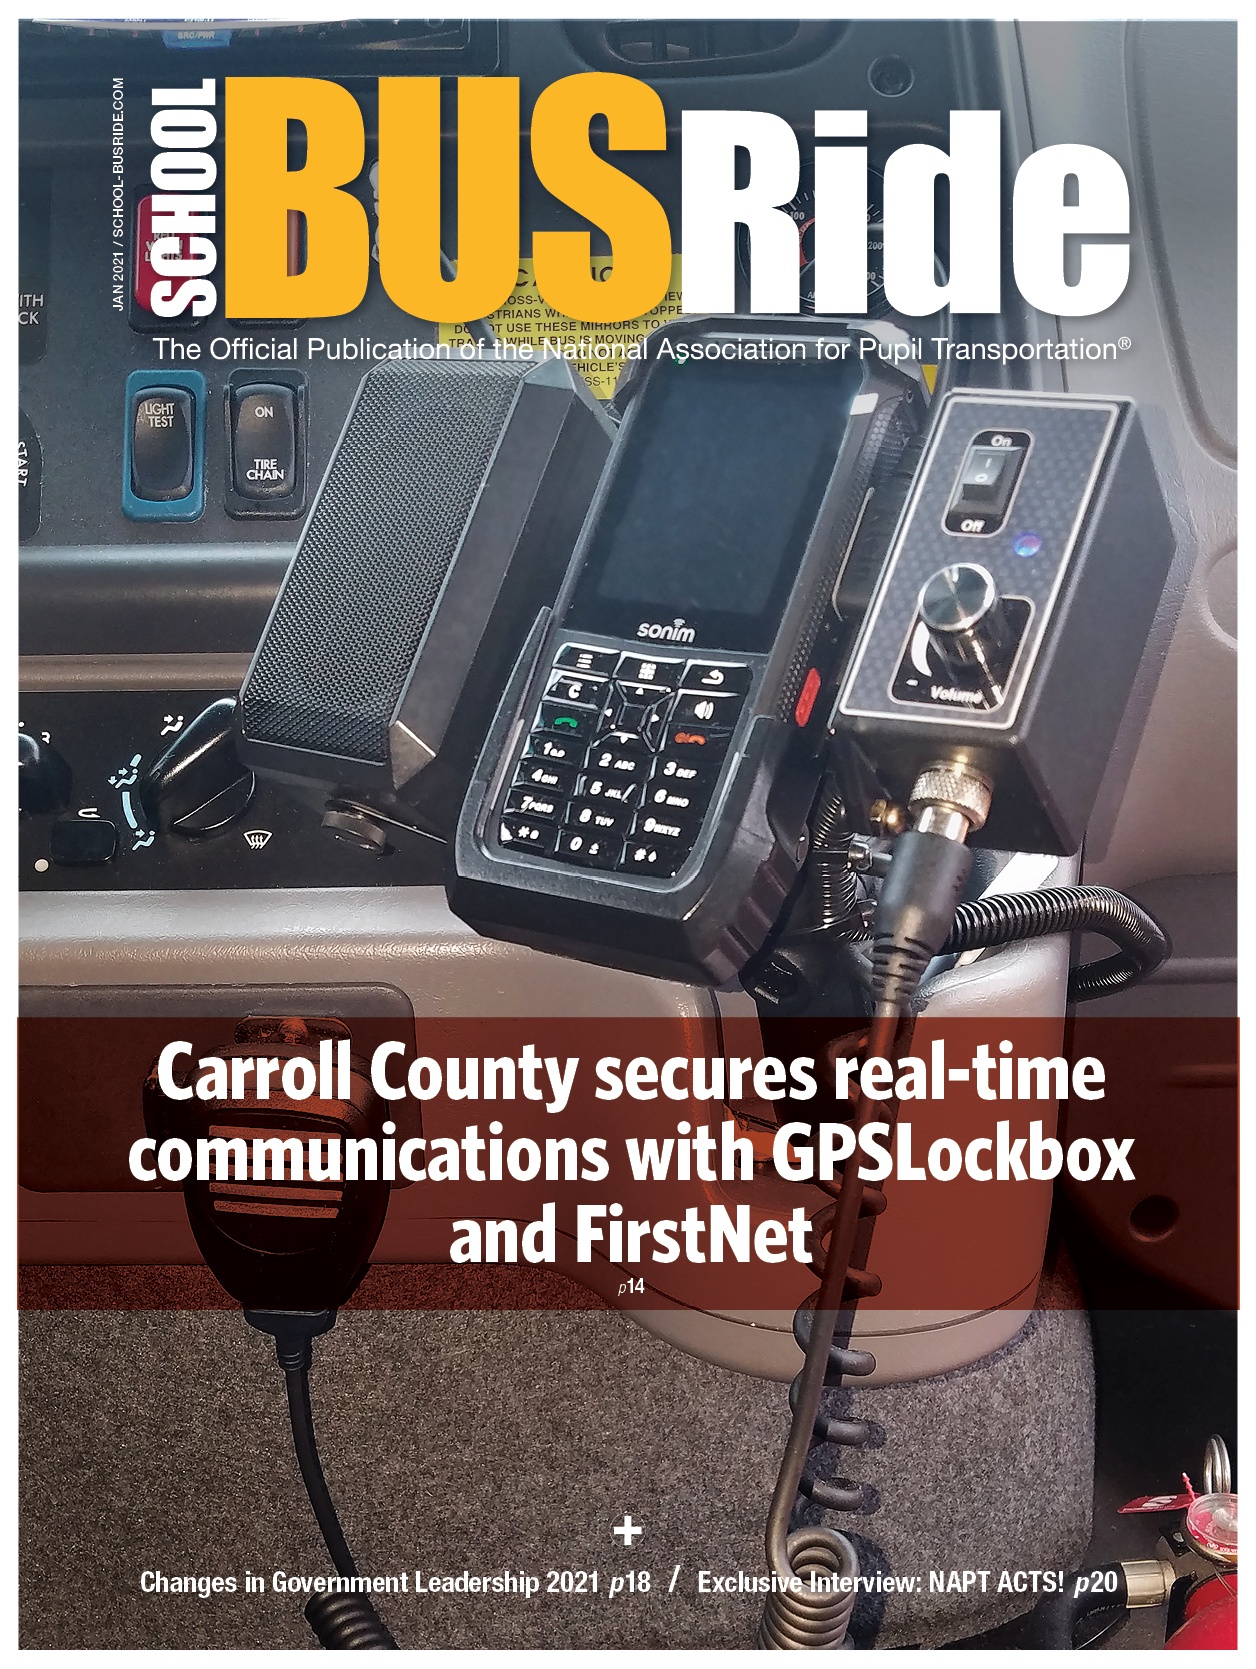 Carroll County secures real-time communication with GPSLockbox and FirstNet